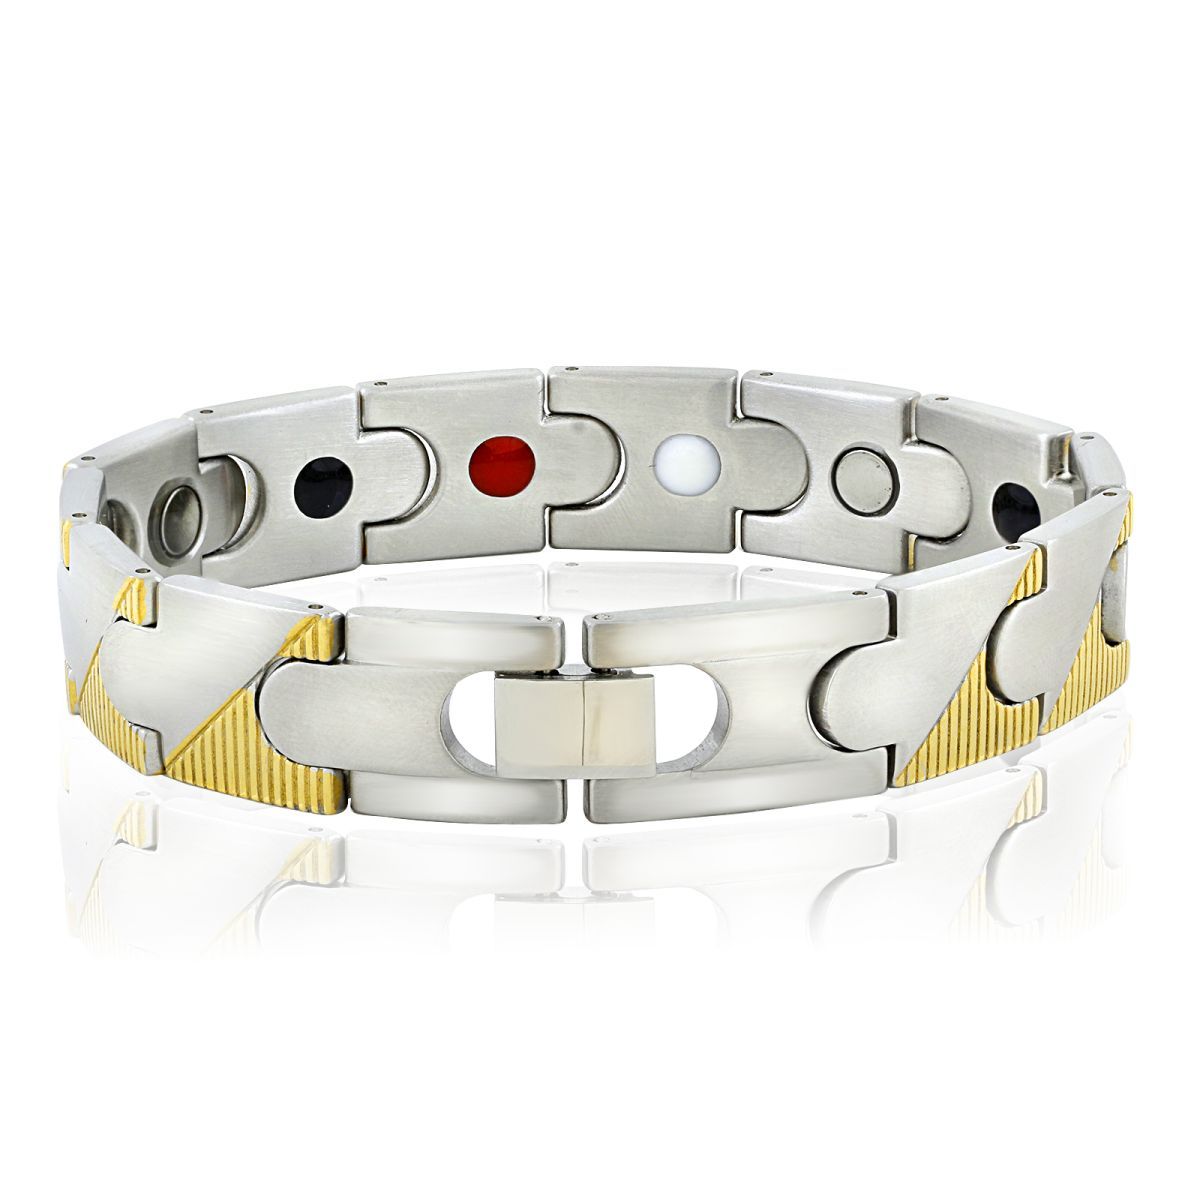 Stainless Steel Magnet Health Care Therapy Bio Energy Bracelet Men